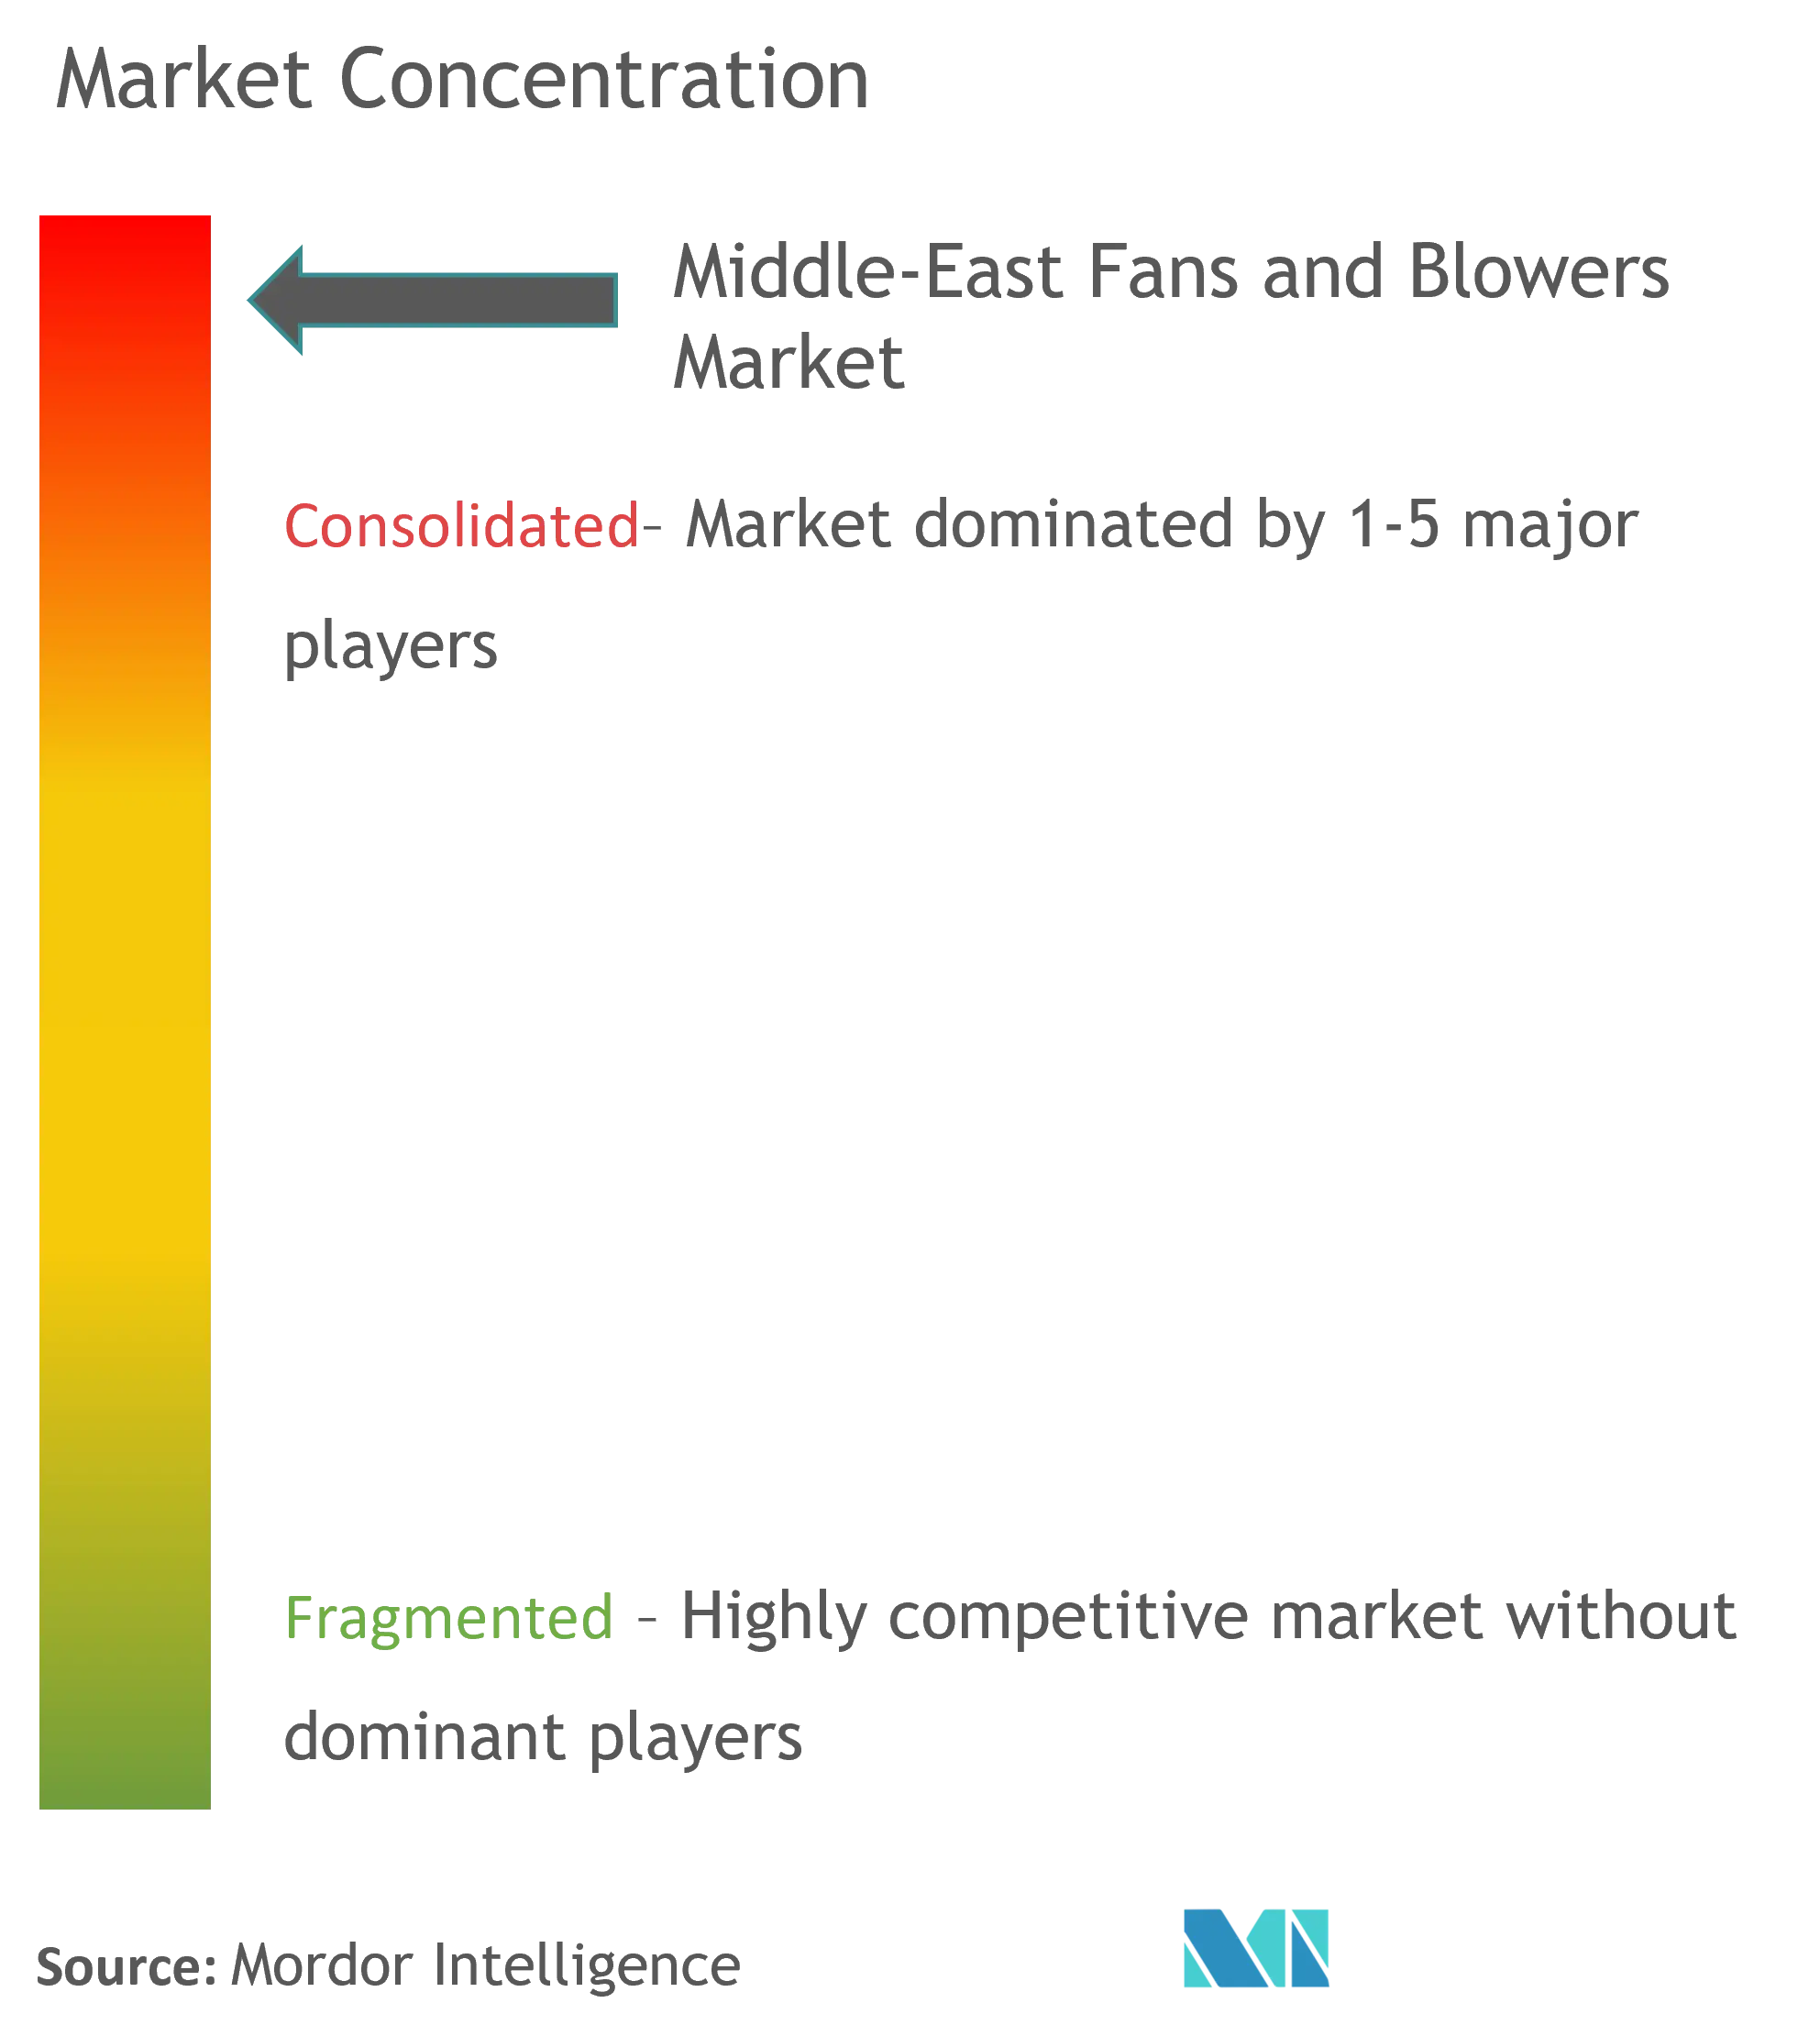 Middle-East Fans and Blowers Market Concentration